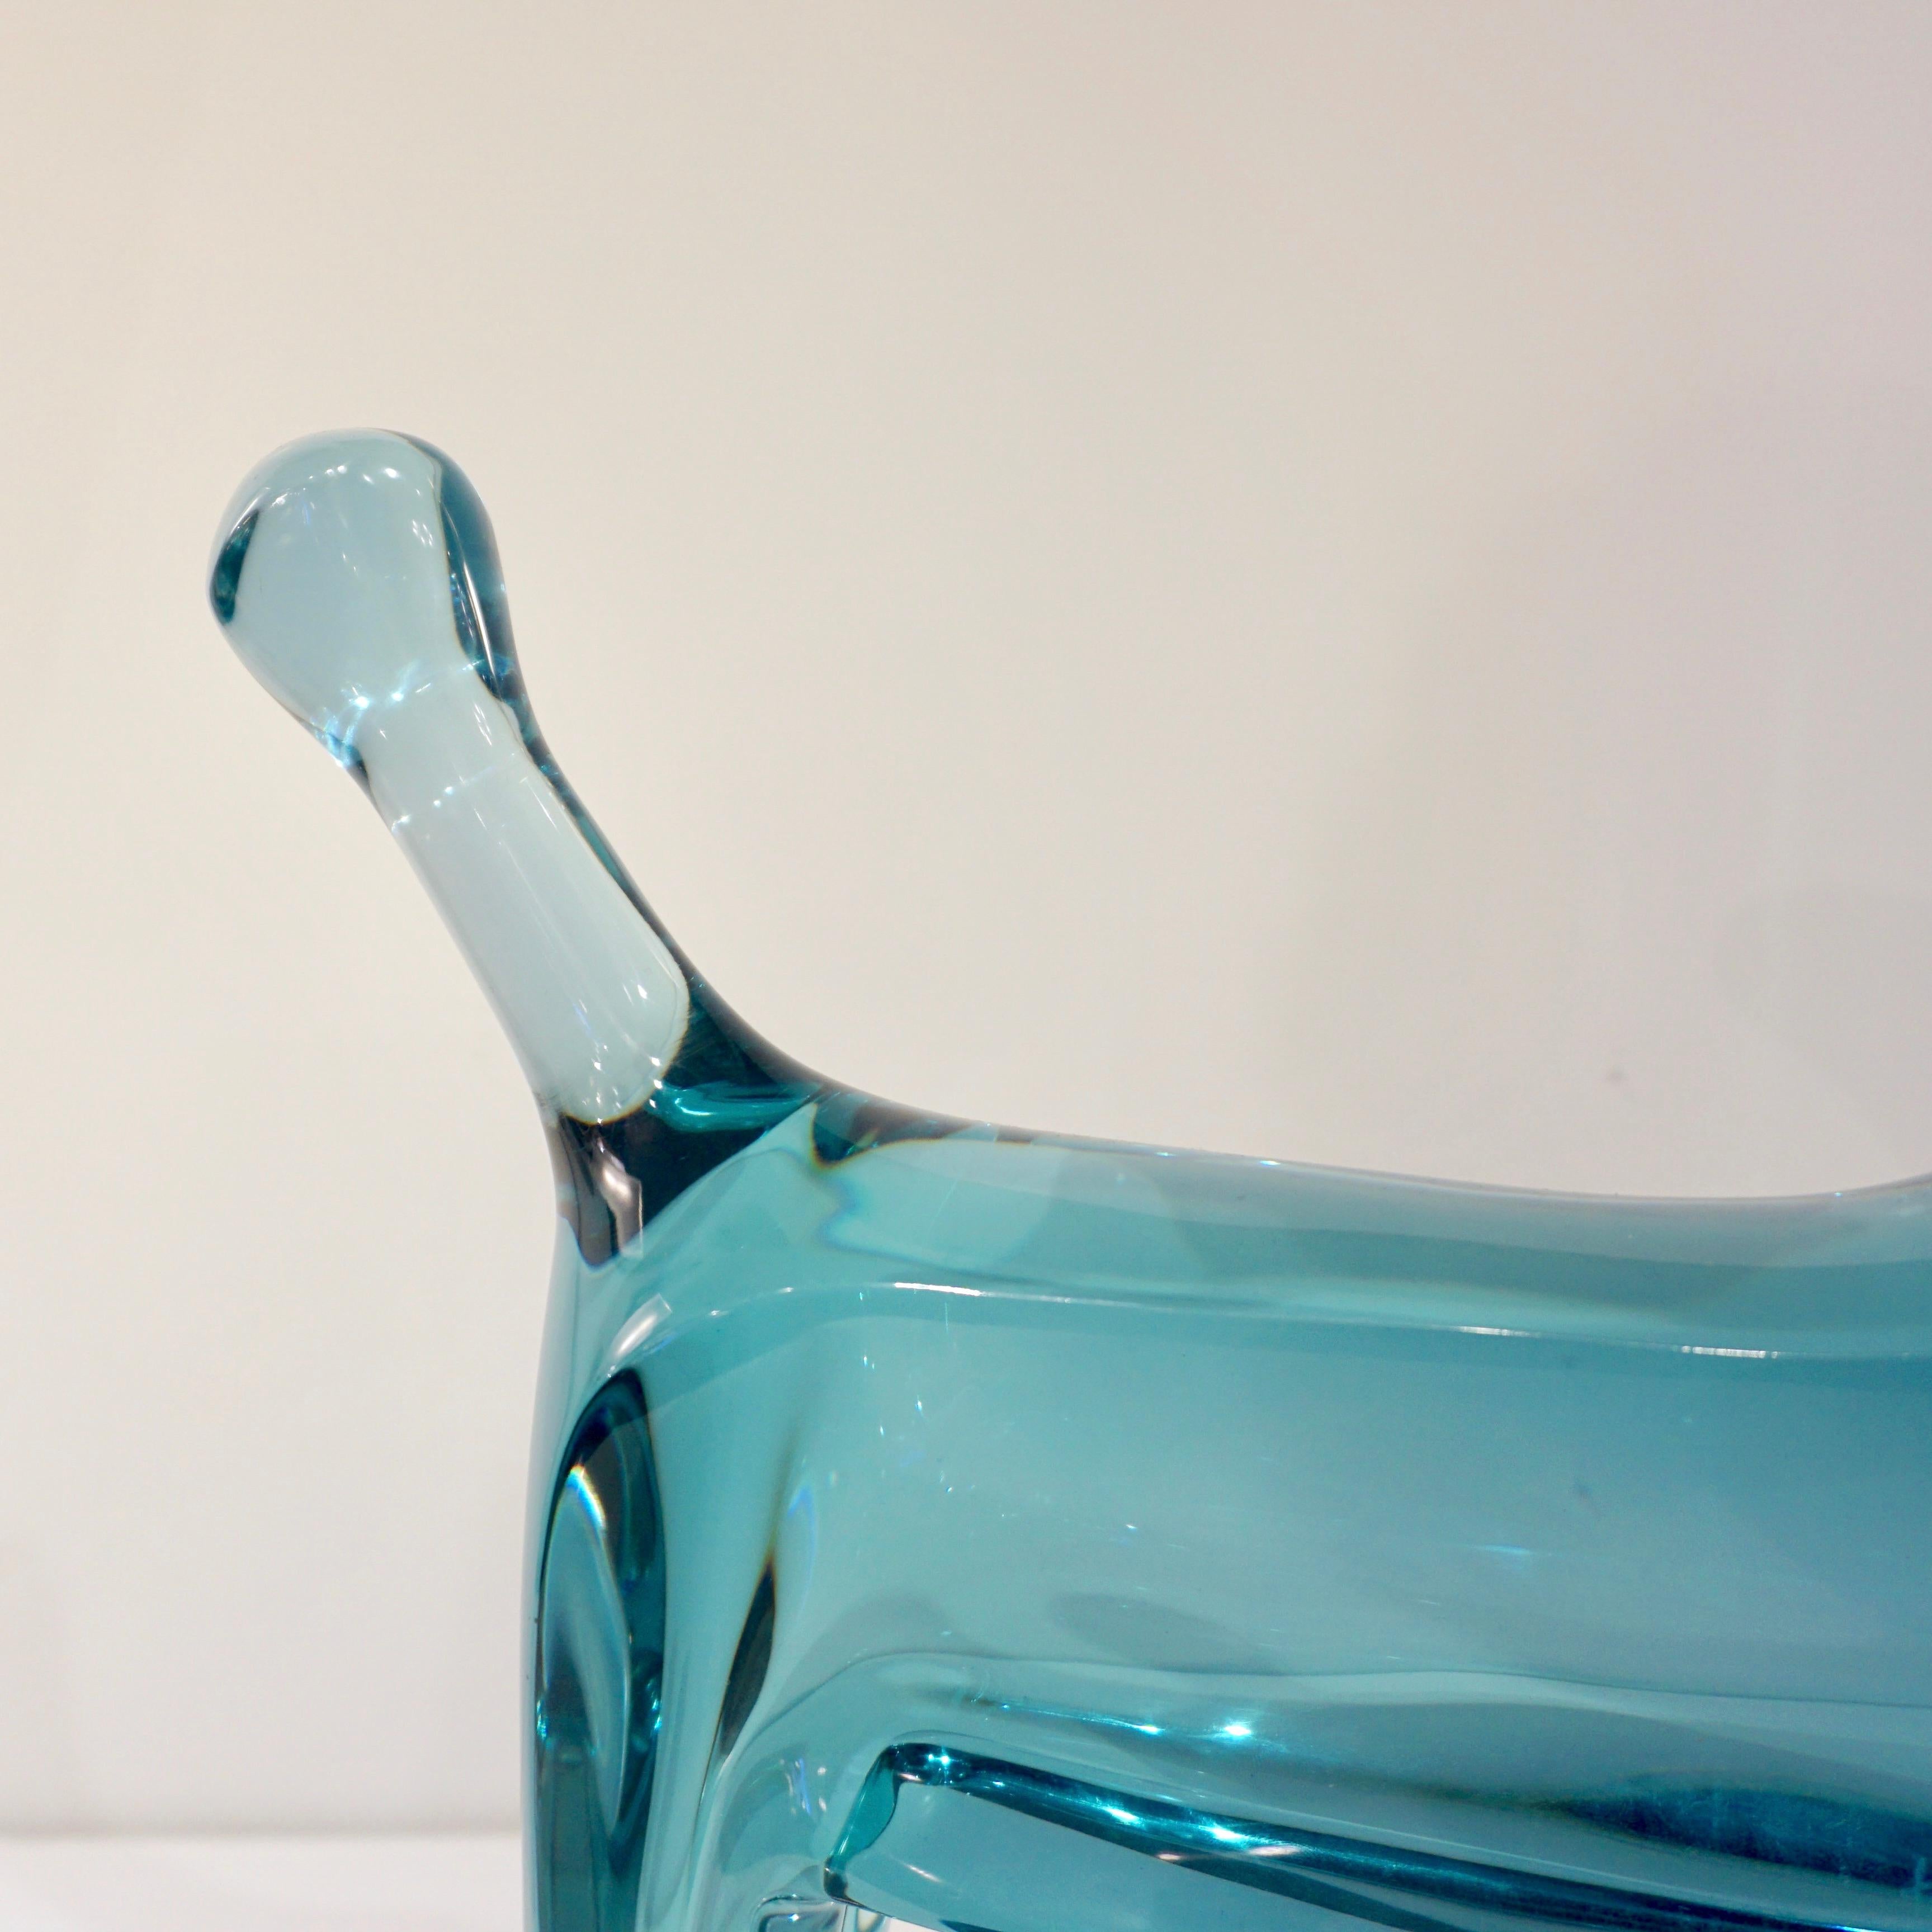 Hand-Crafted Contemporary Minimalist Marine Azur Blue Modern Lucite Sculpture of Poodle Dog